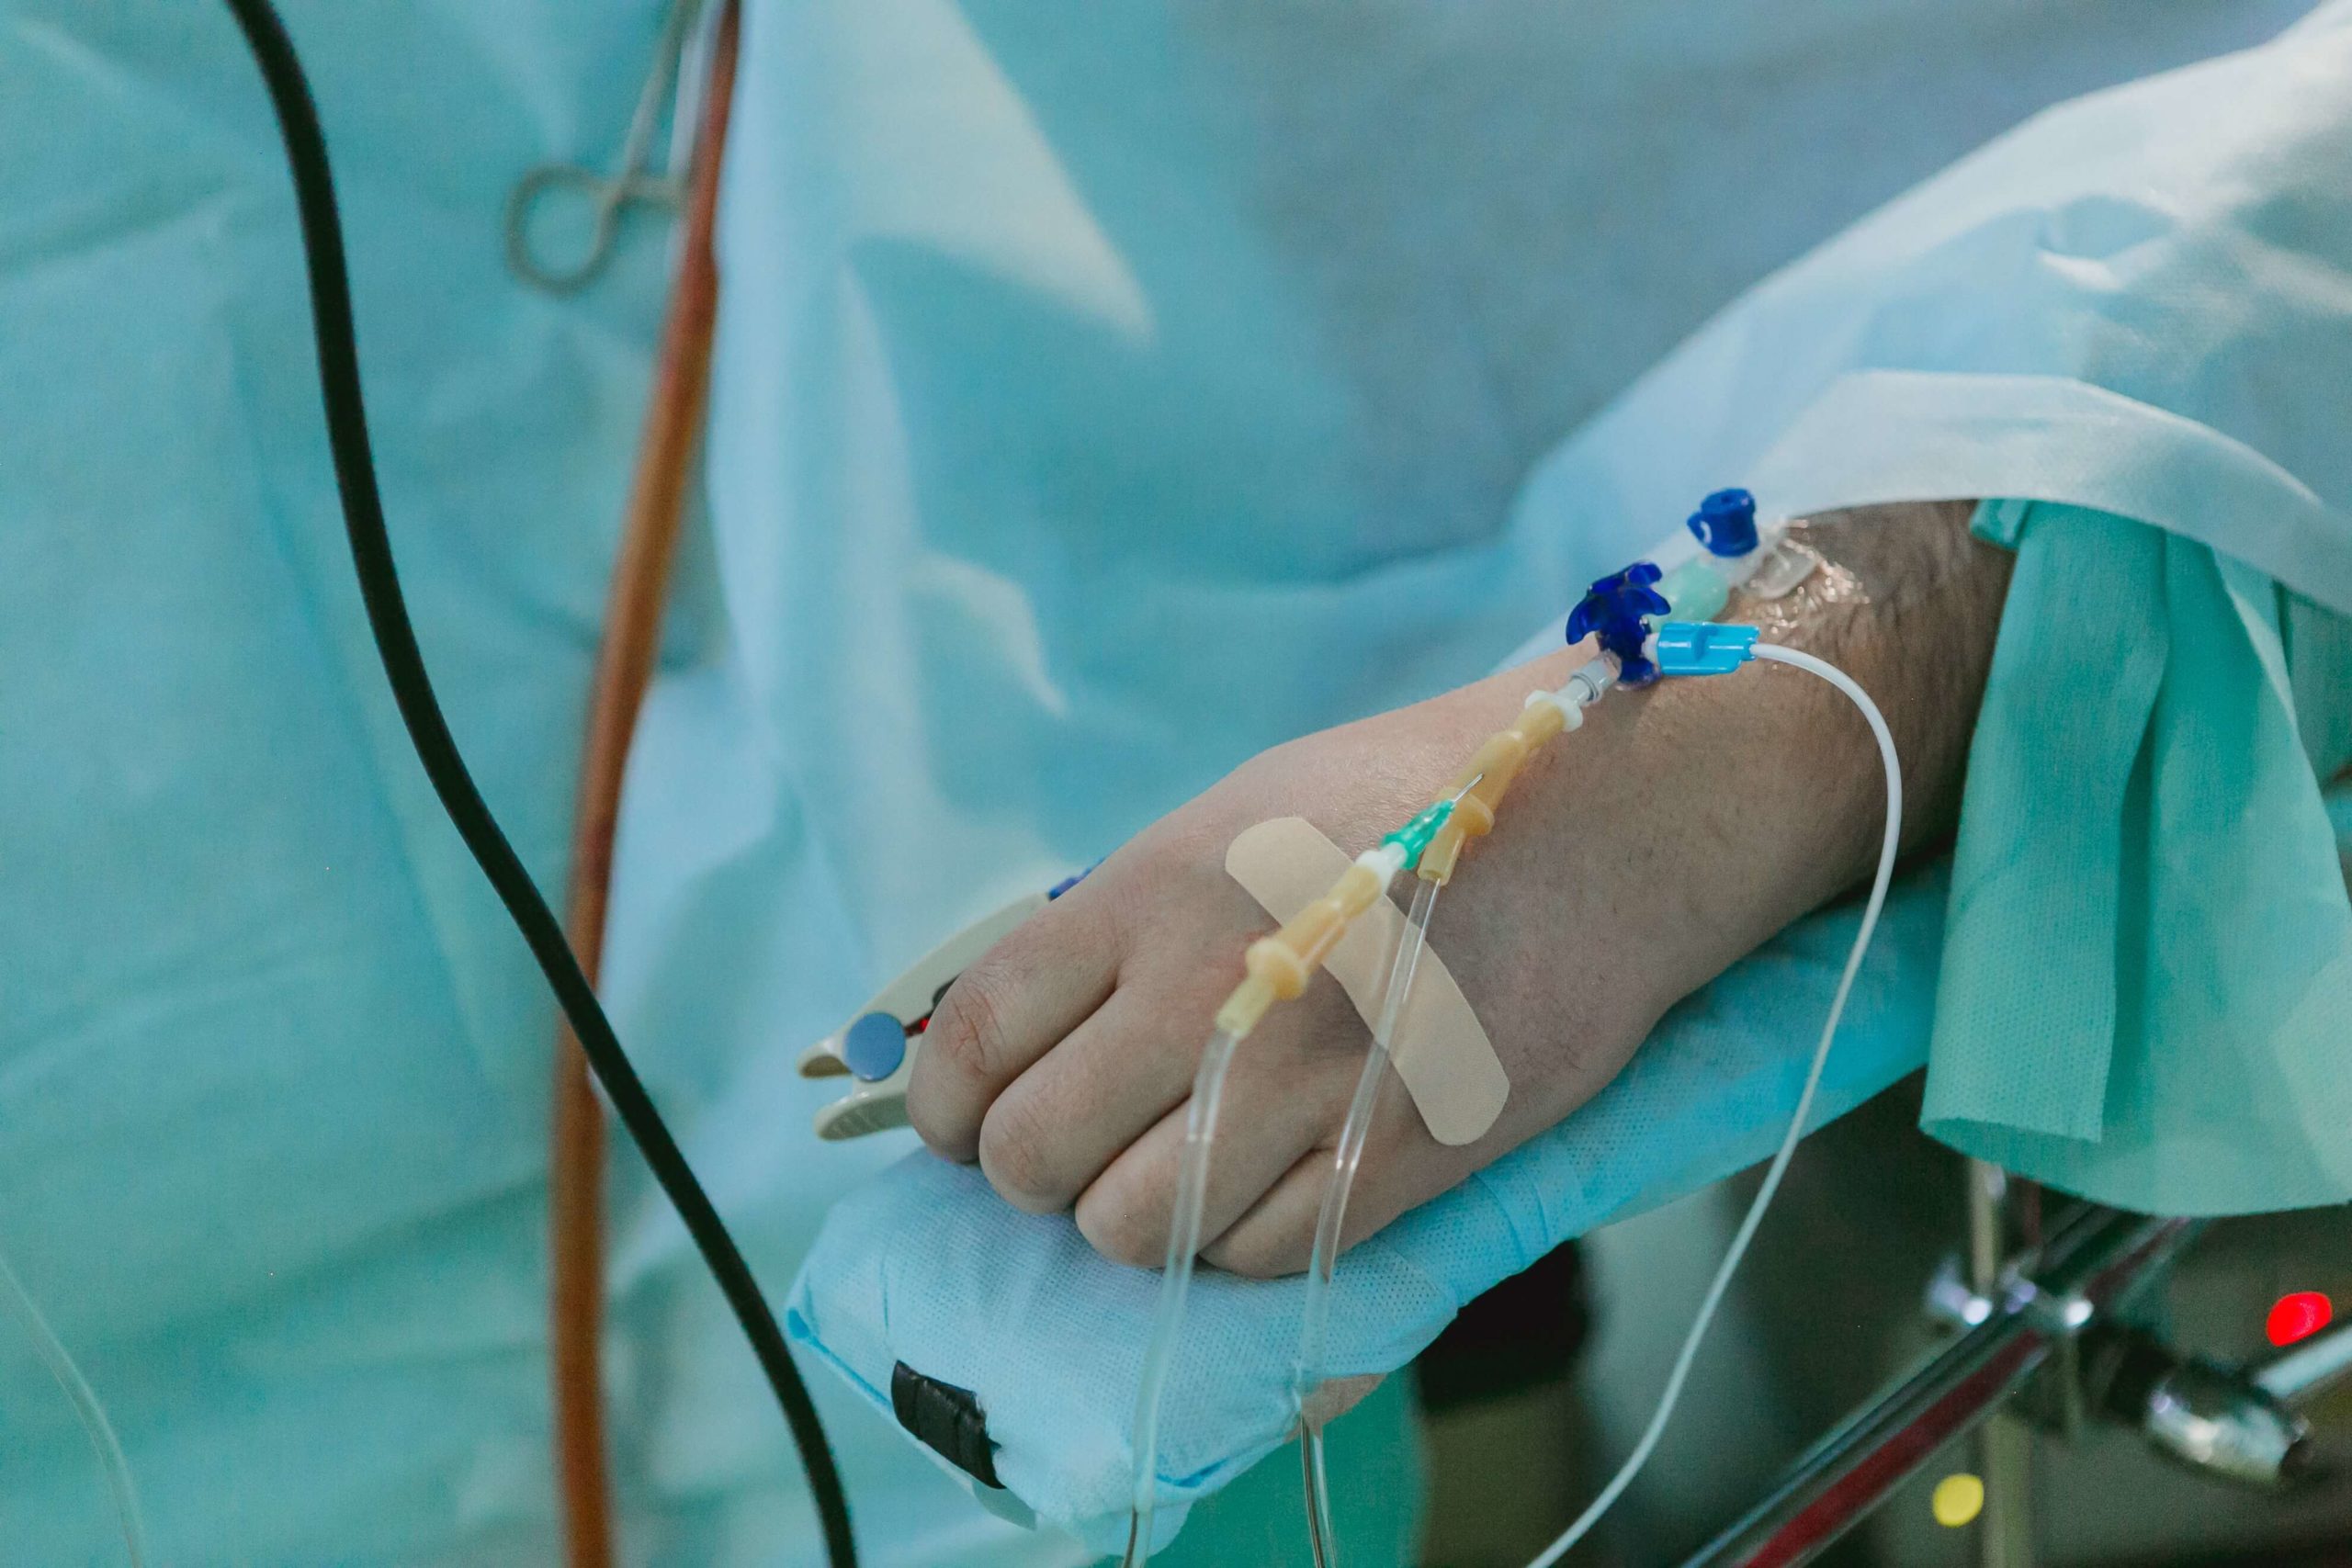 Man in hospital with IV trip on his hand